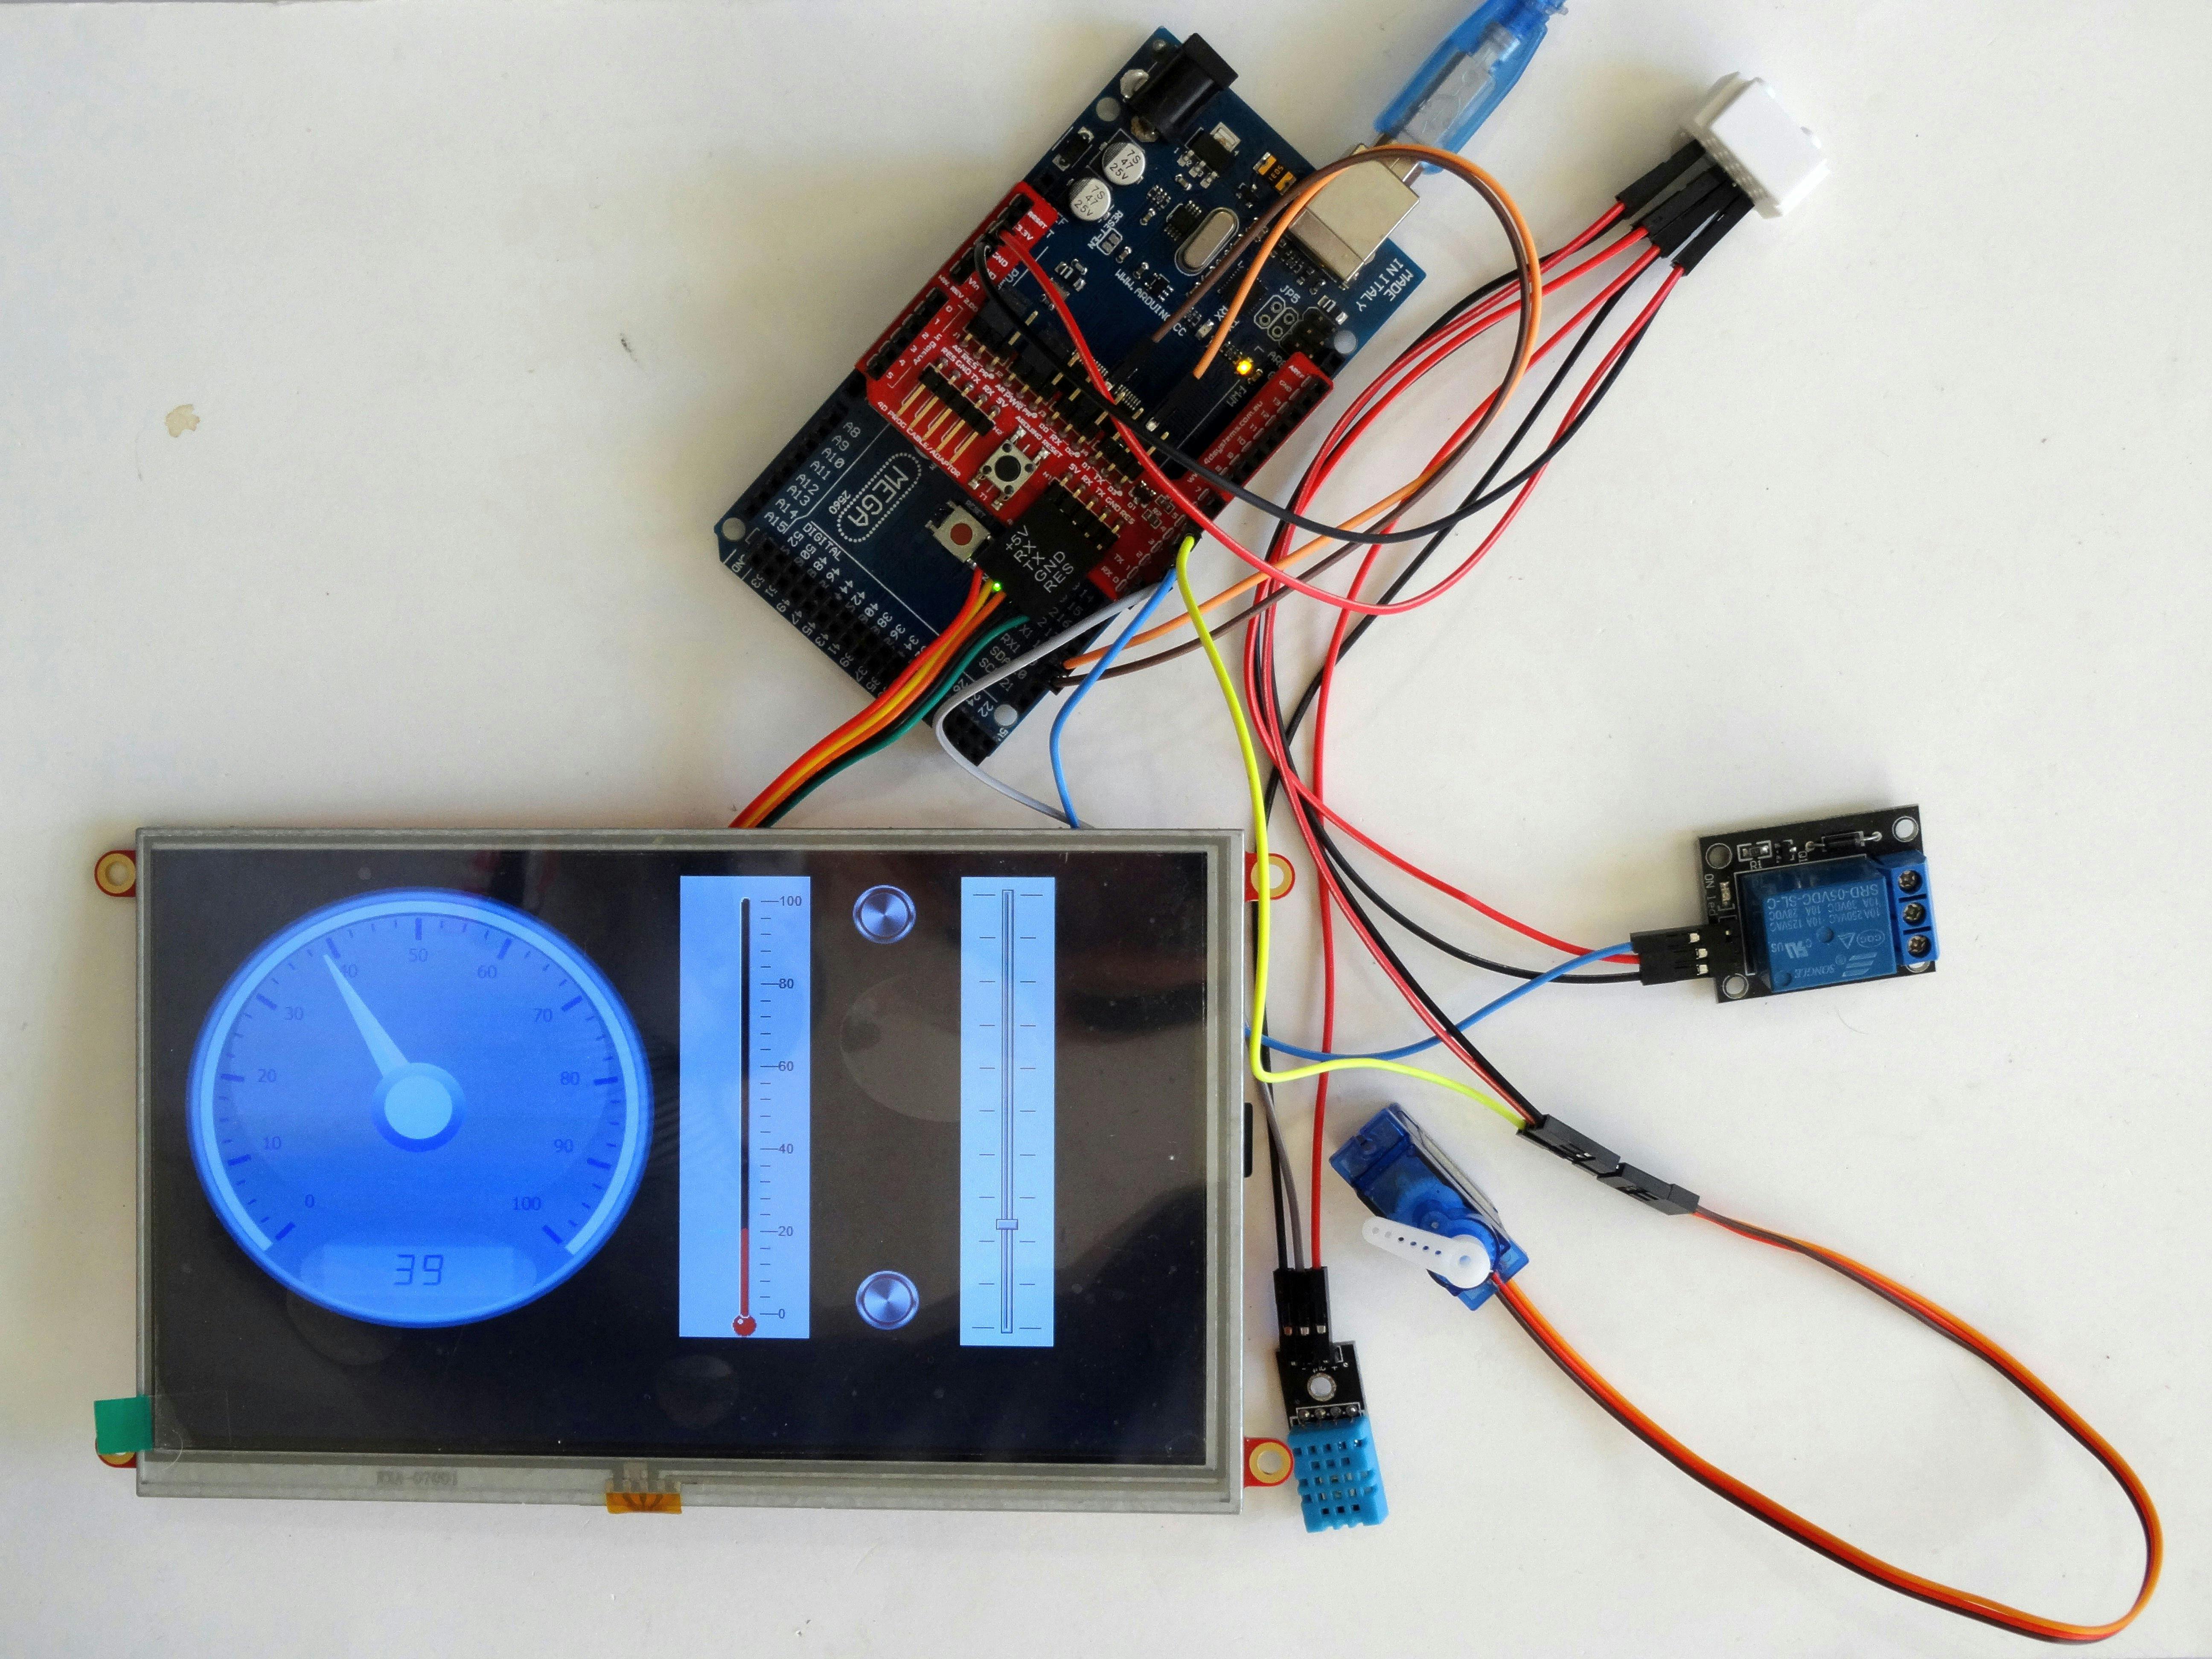 Arduino: Connect 4D Systems ViSi Genie Smart Display - Arduino Project Hub